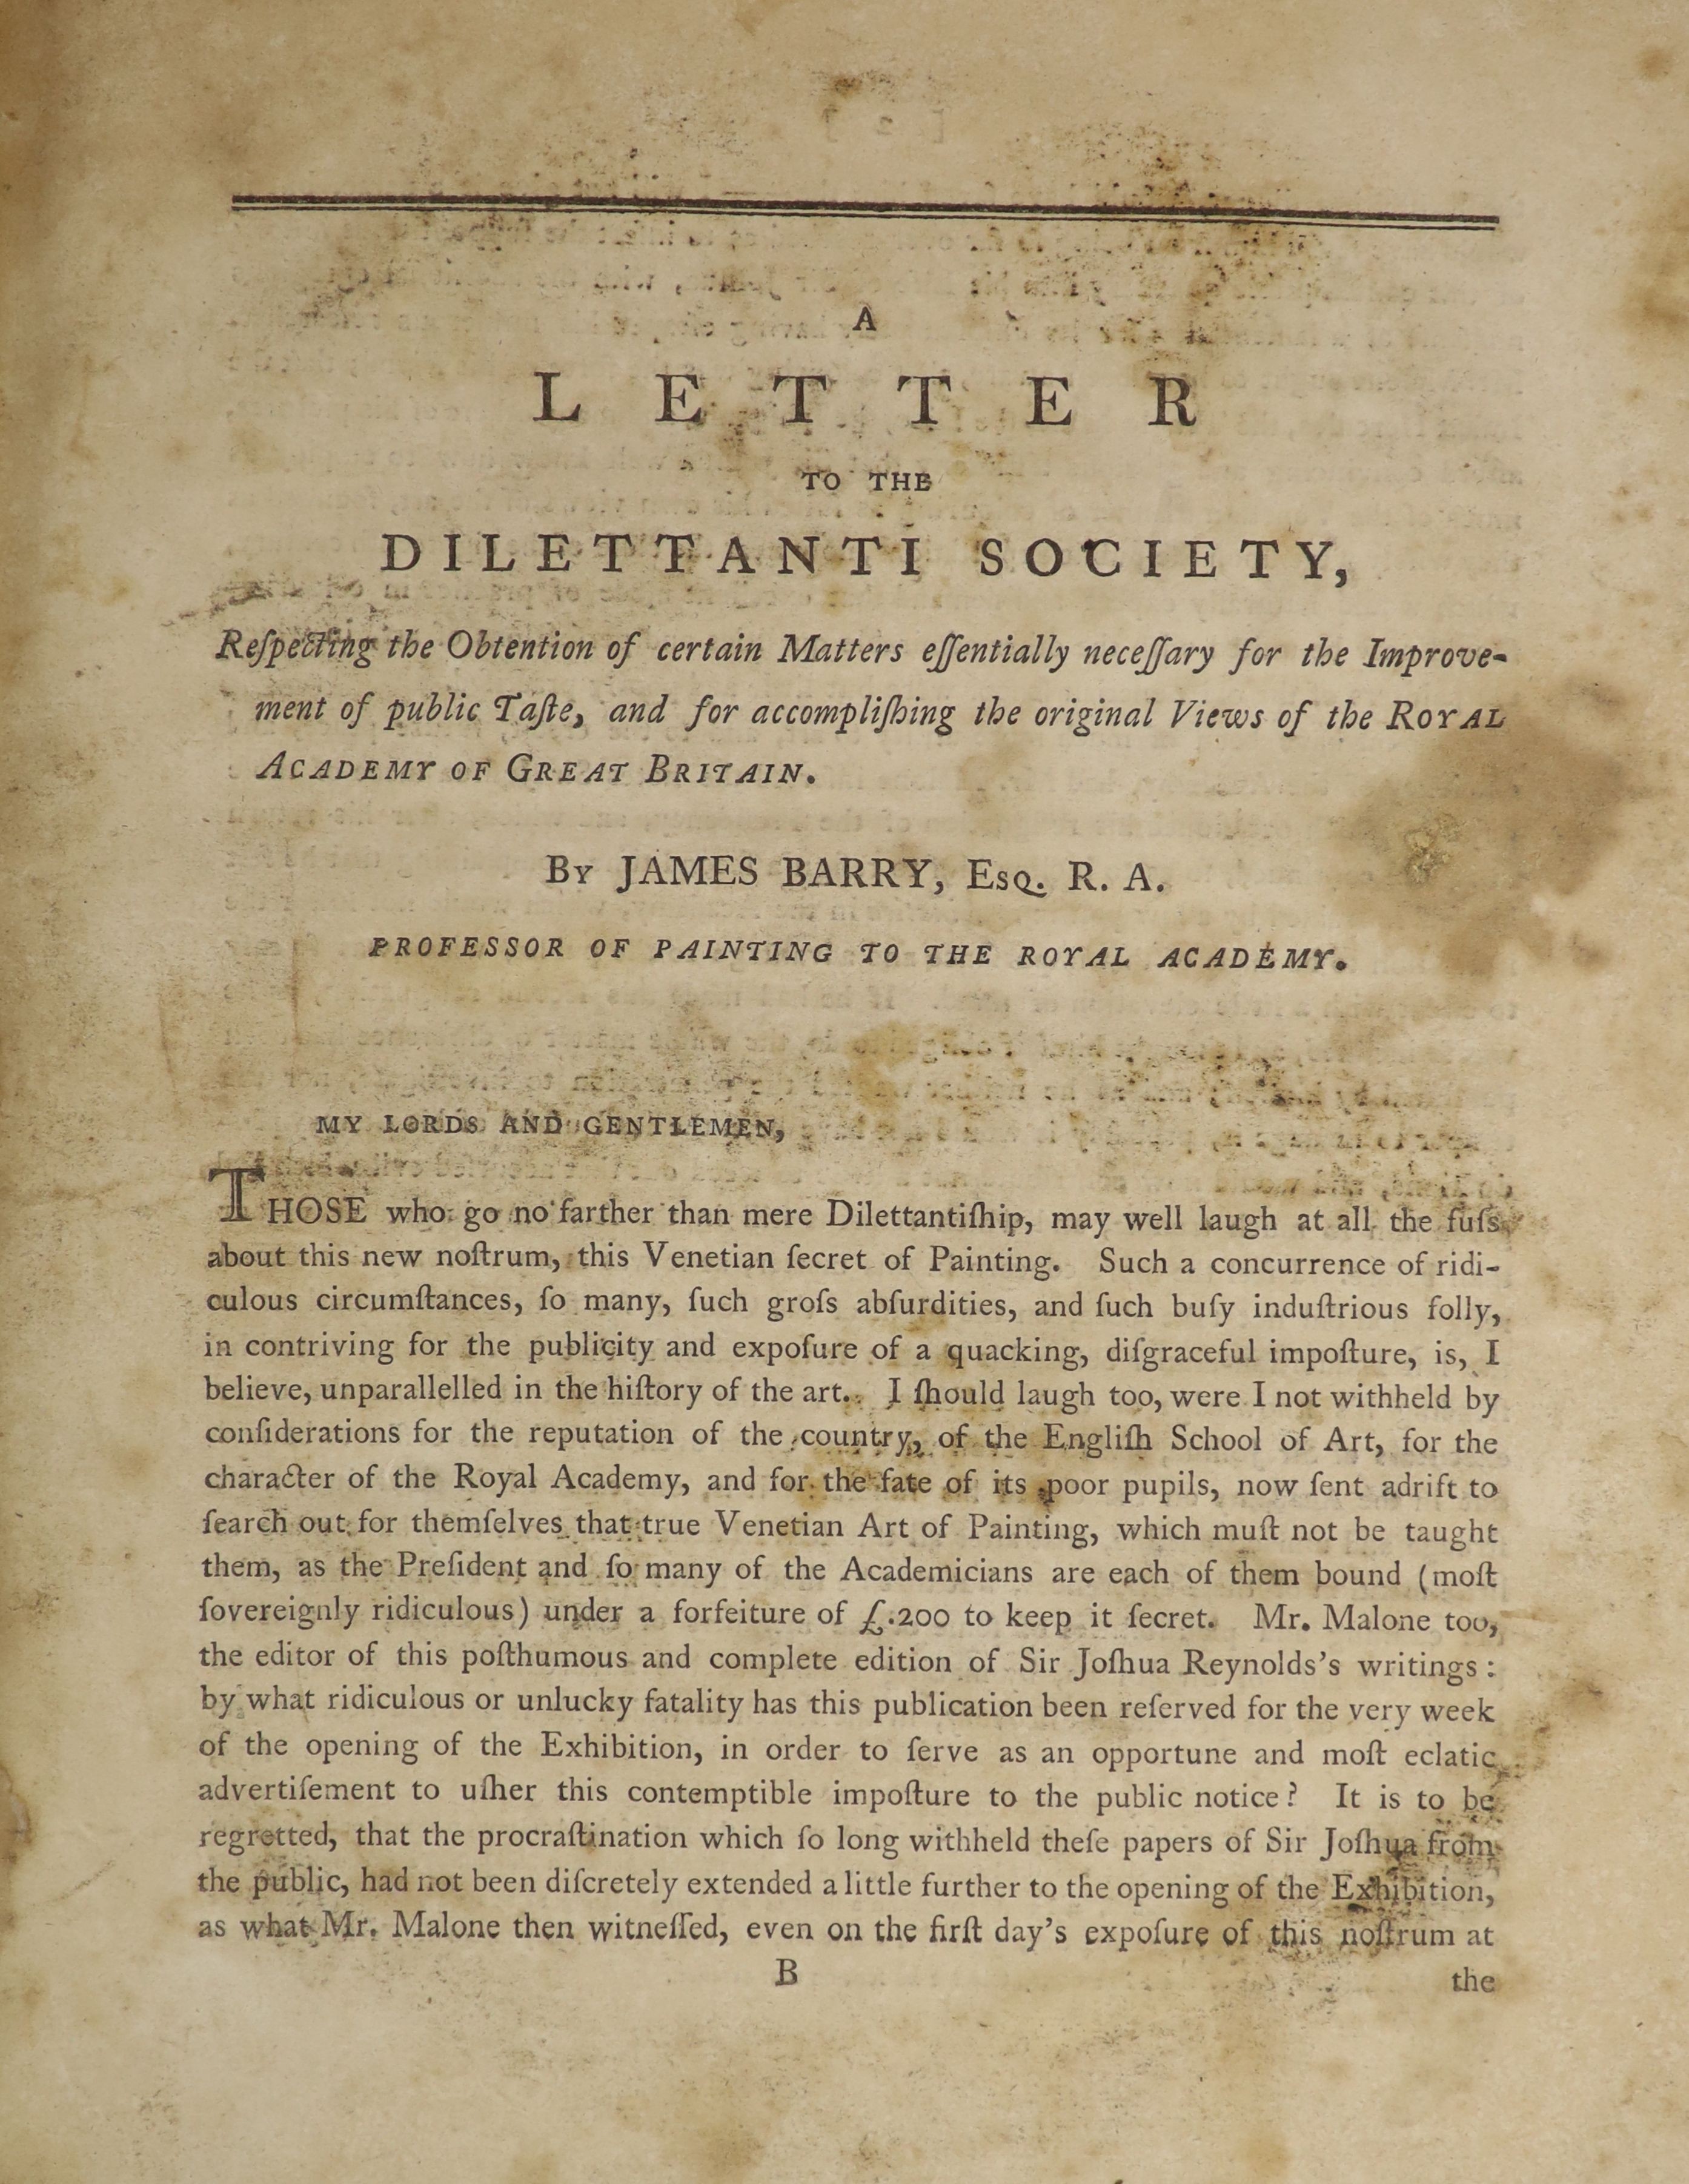 Barry, James - A Letter to the Dilettante Society, 1st edition, 4to, rebound plain boards, [London, 1798] The letter deplores the state of patronage in Britain and what he regarded as the Royal Academy’s ineffectiveness.